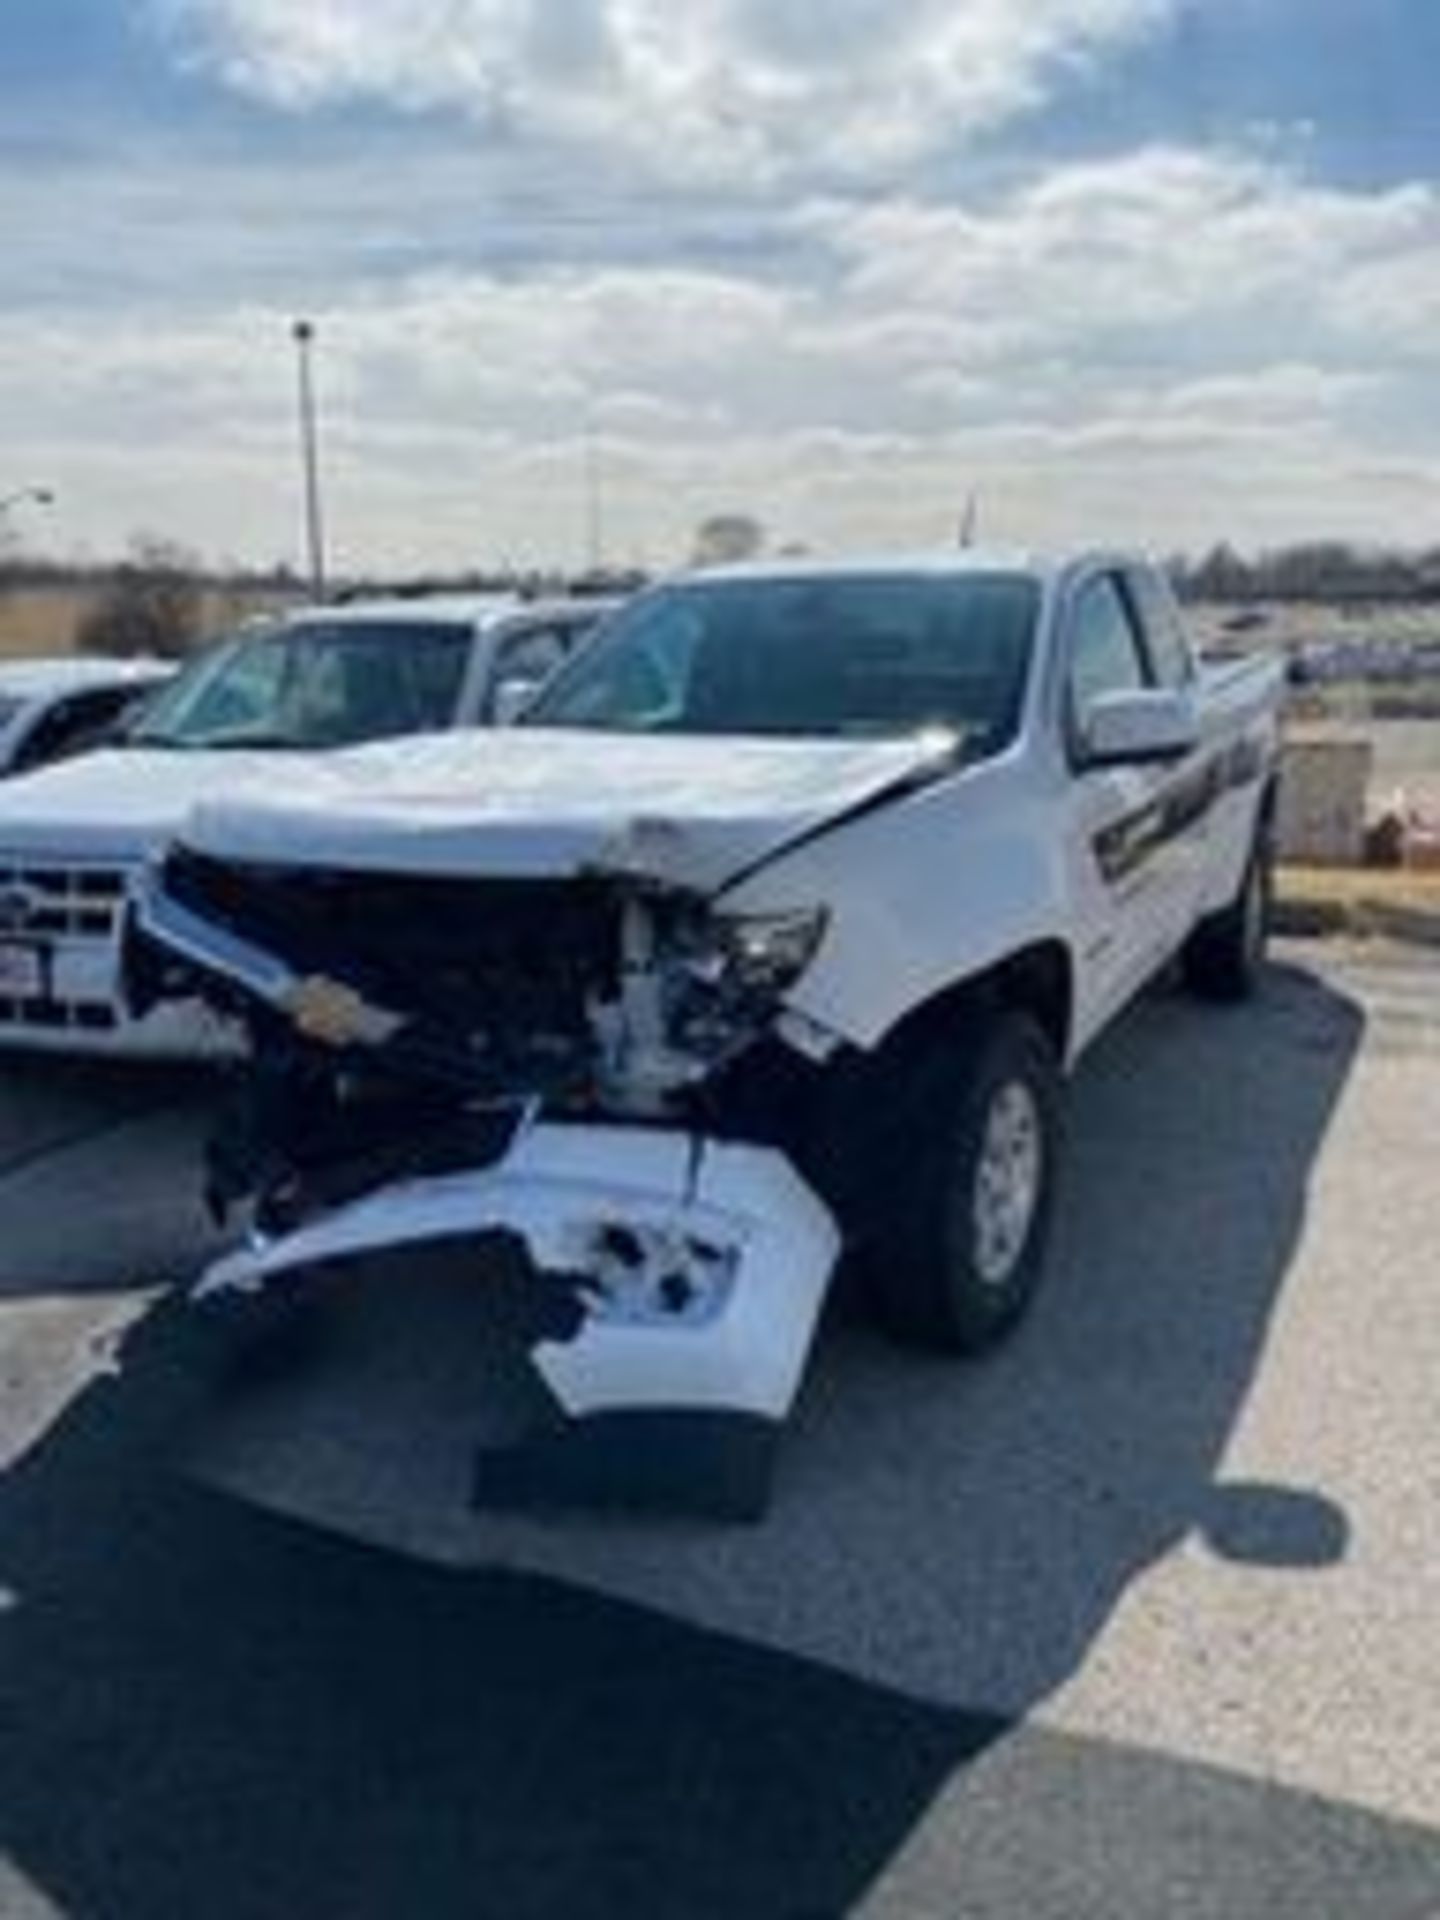 2015 Chevrolet Colorado Pickup Truck (Needs work, recently involved in a collision) - Image 7 of 11